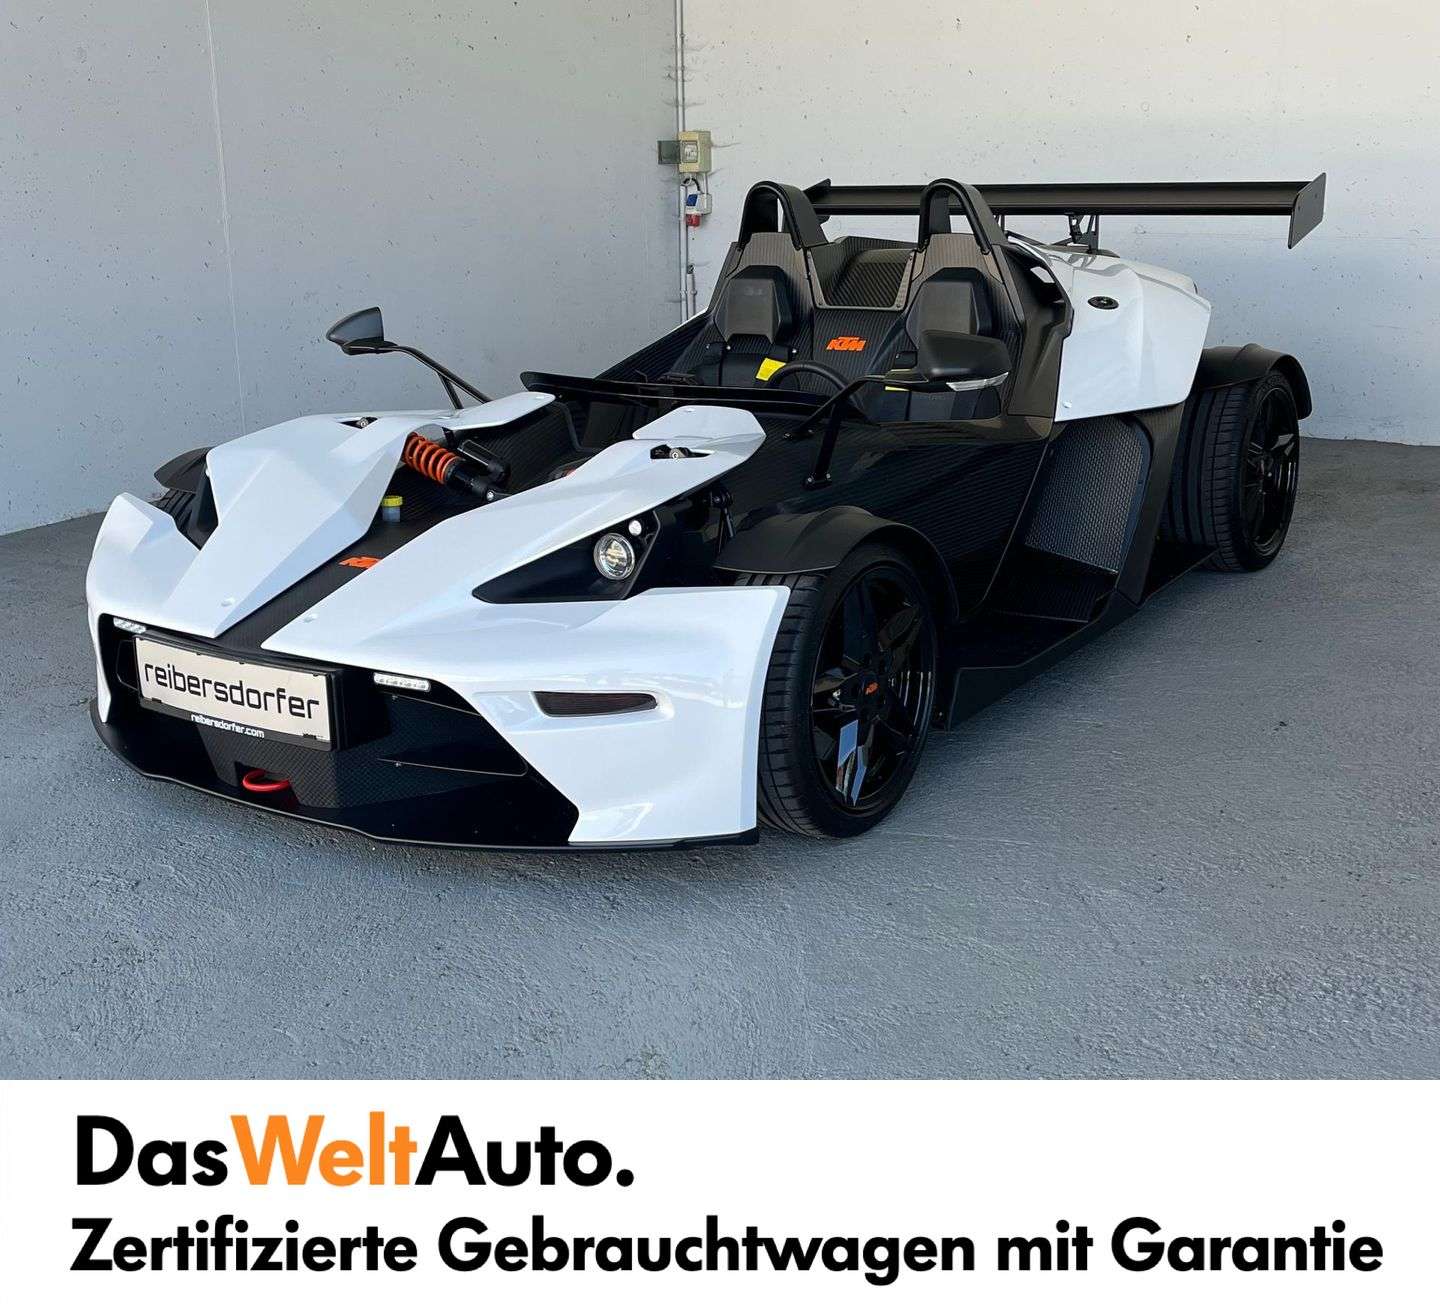 KTM X-Bow R Convertible in White used in Obertrum am See for € 170,000.-